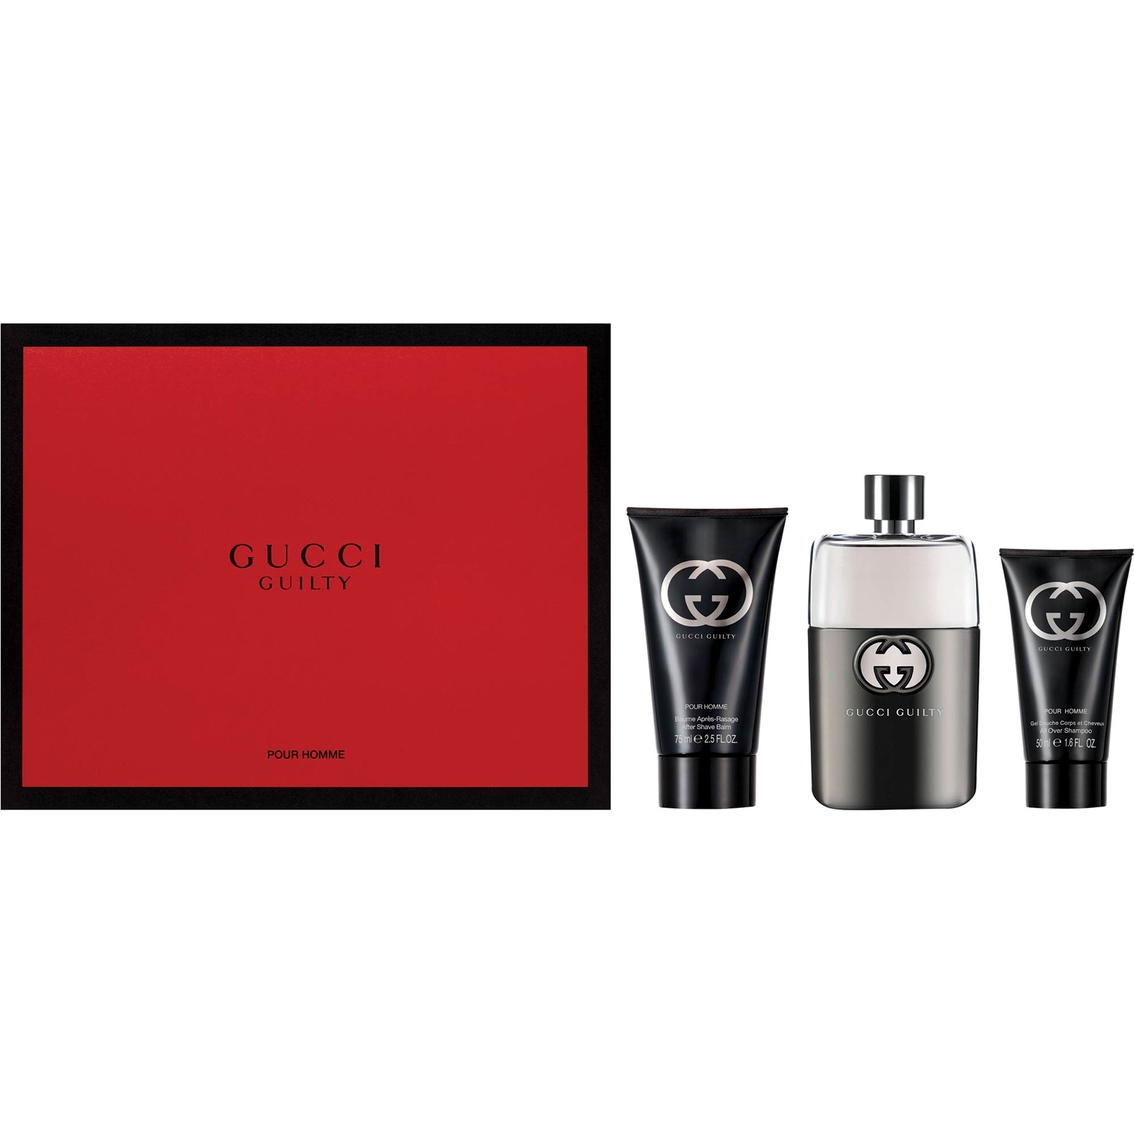 Gucci Guilty Pour Homme Gift Set Gifts Sets For Him